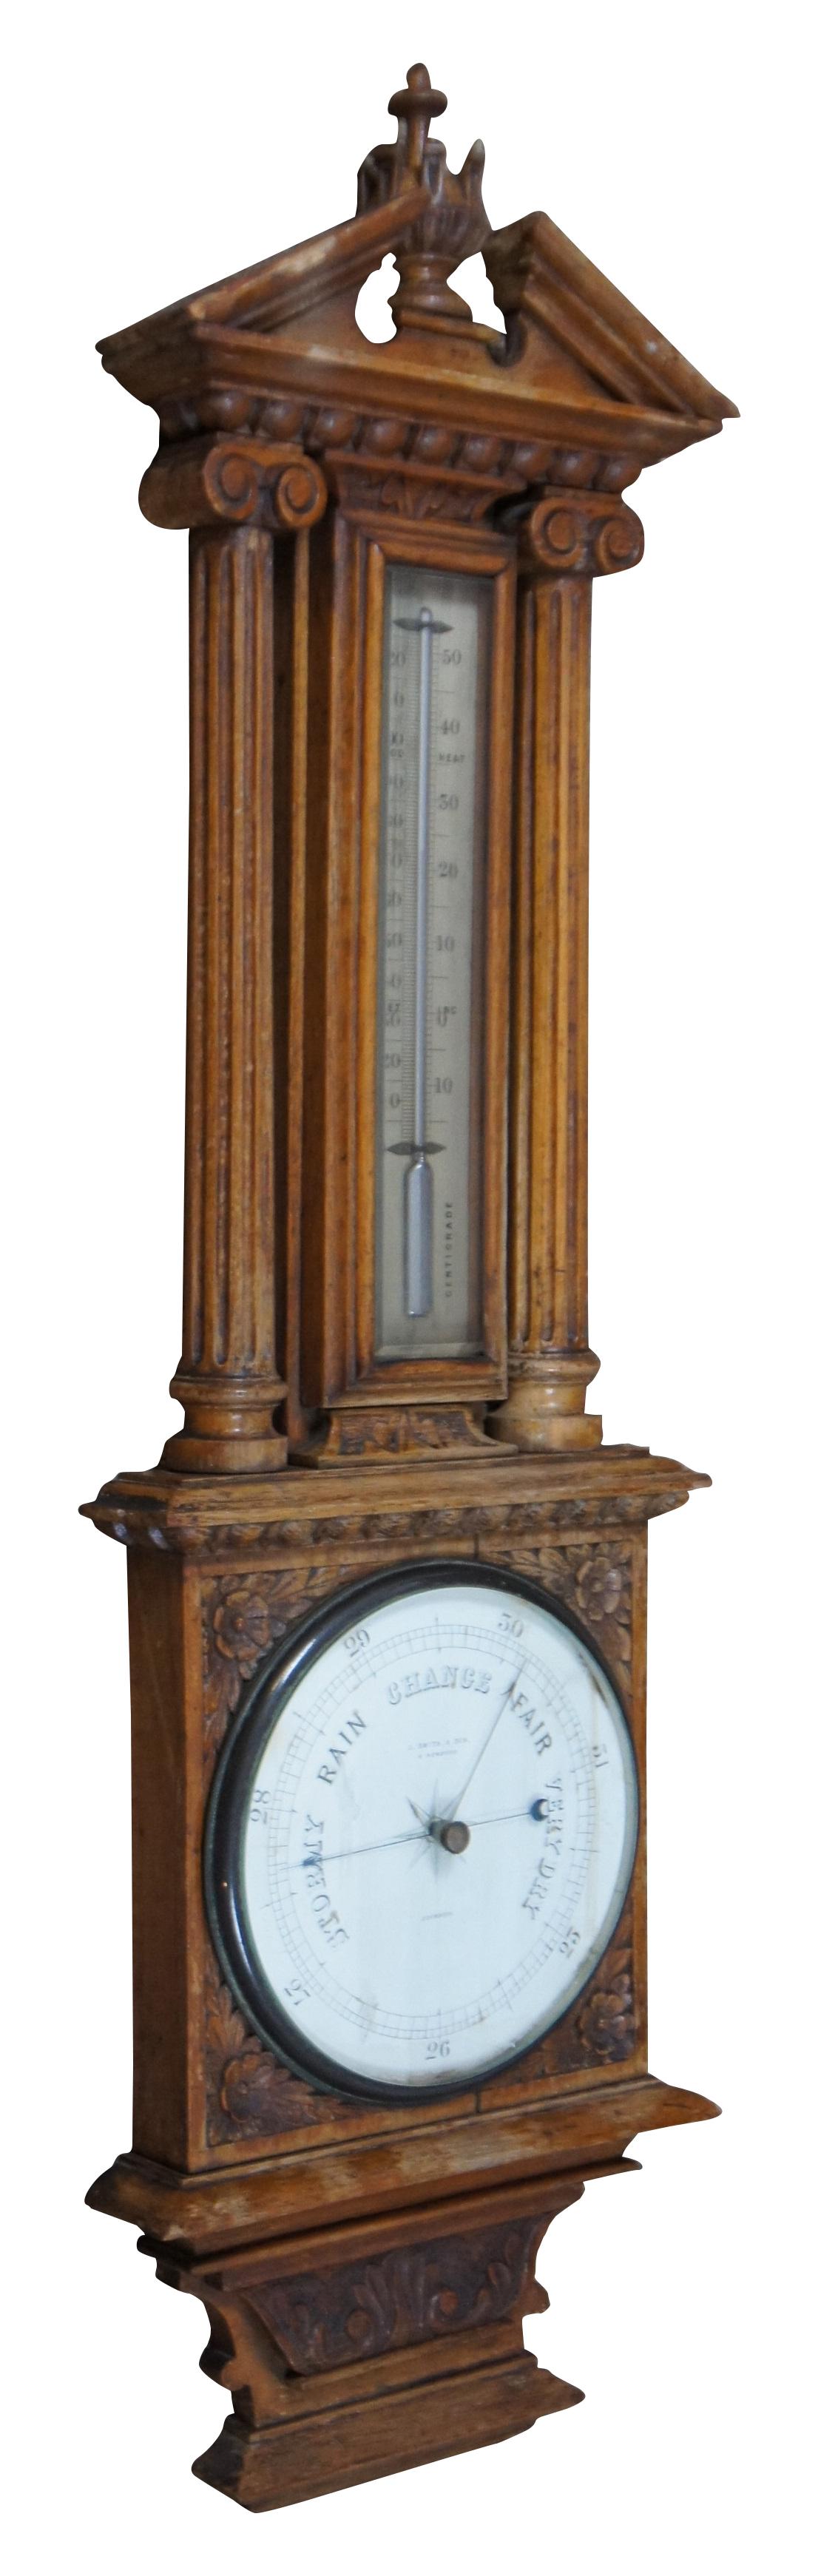 A rare and impressive early 19th century Englsih wall hanging aneroid barometer and mercury thermometer. Perfectly housed in a Neoclassical inspired carved oak case with open pediment over columns. The case features beautiful carvings of acanthus,